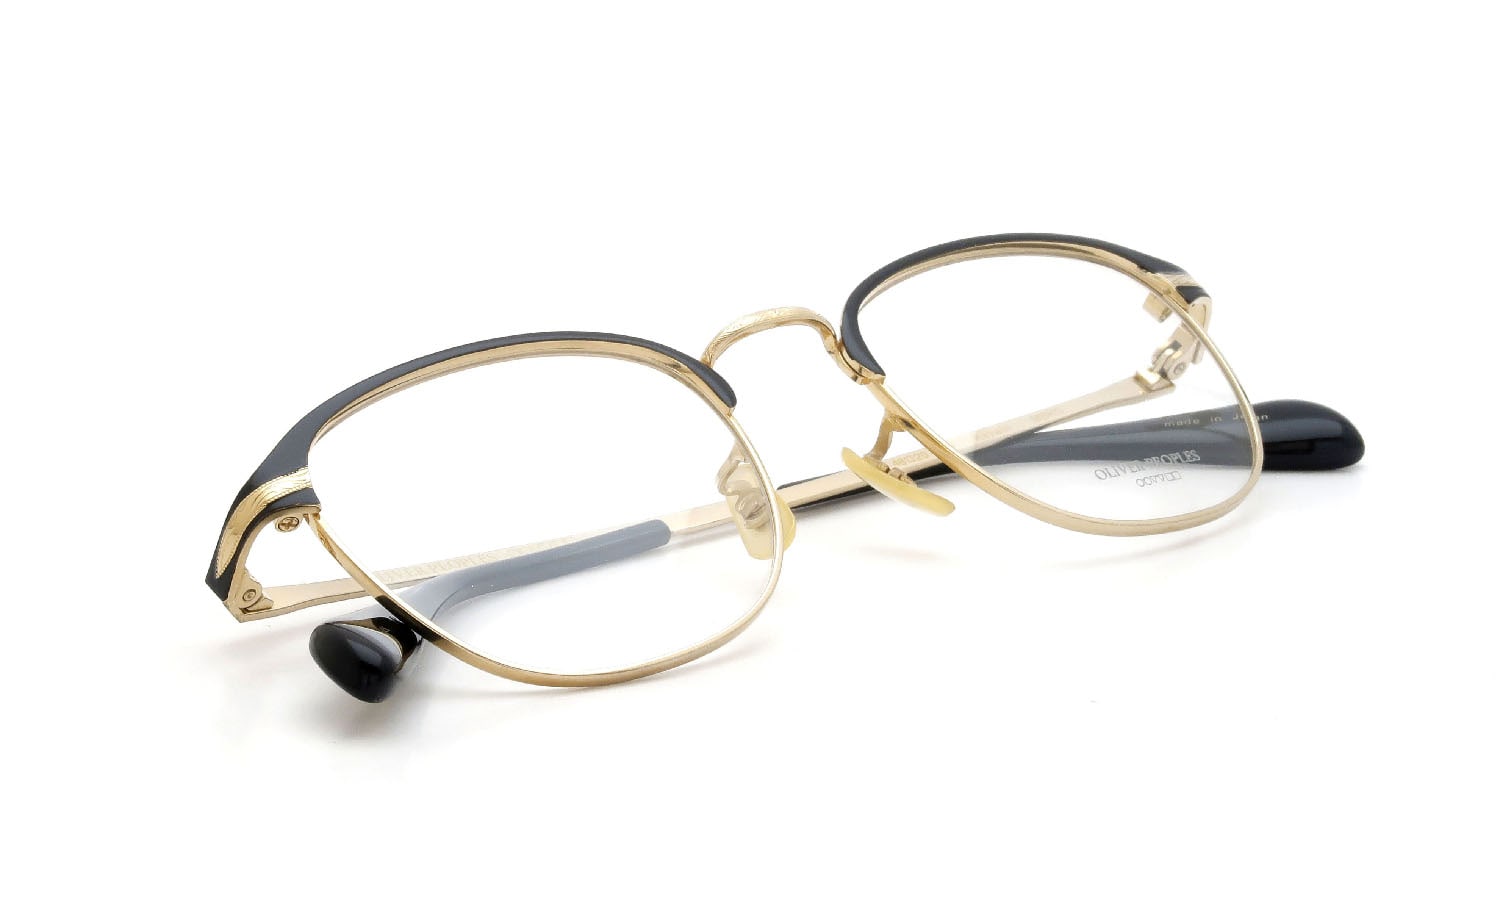 OLIVER PEOPLES  kaywin MBKG #001